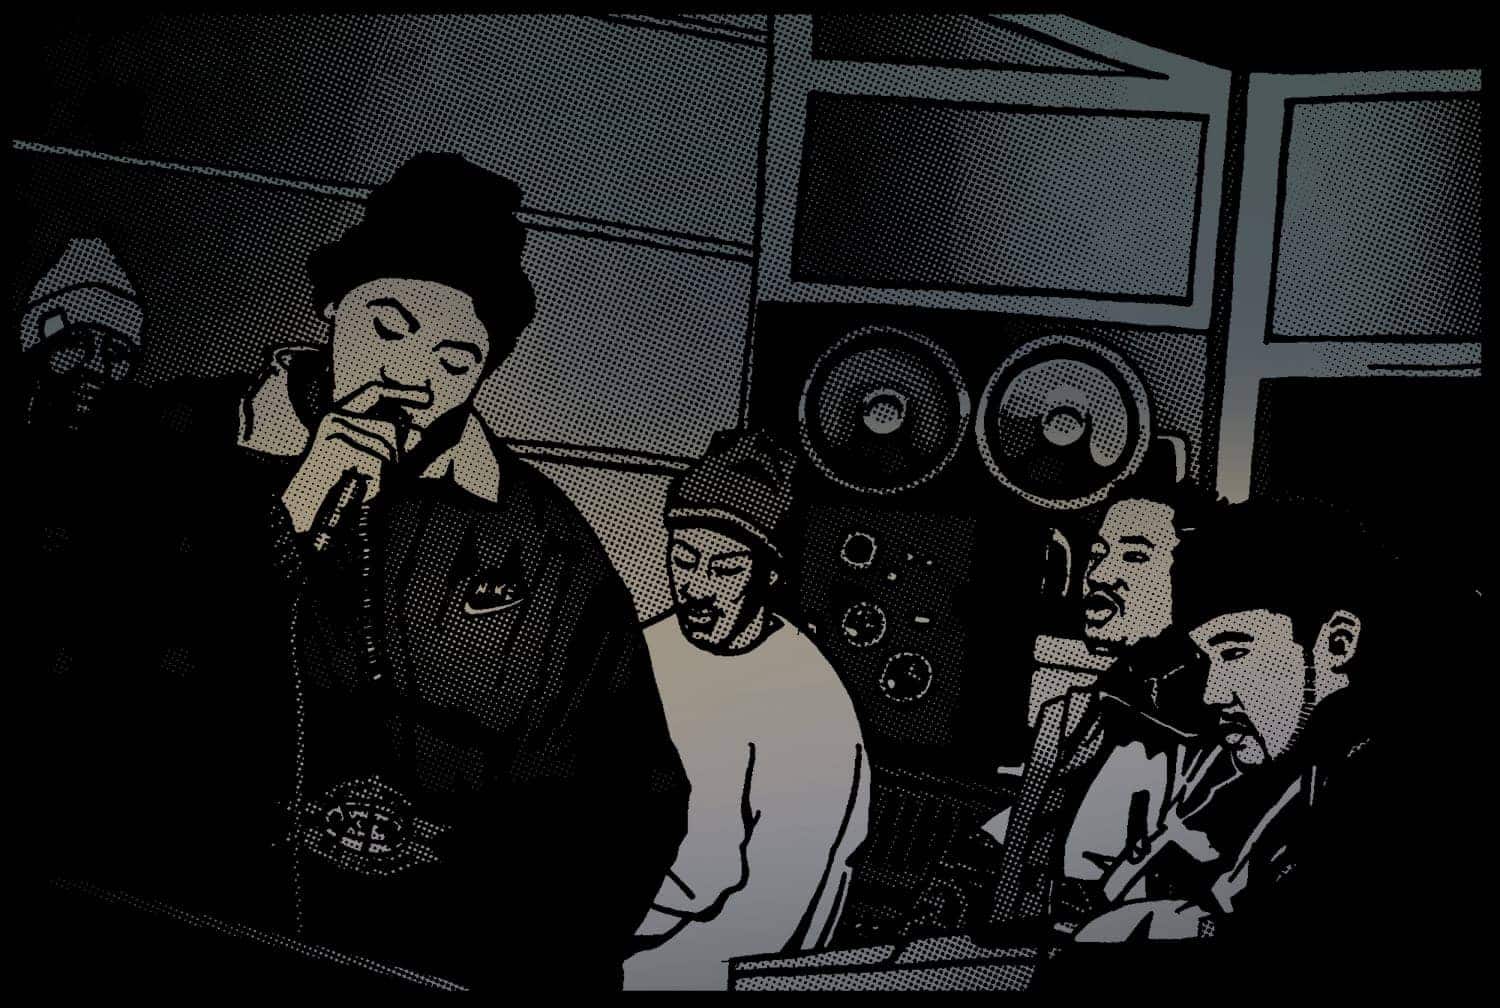 Drawing of Nas in the studio with hip hop legends Q-Tip and crew recording the 90's classic golden era hip hop album Illmatic.